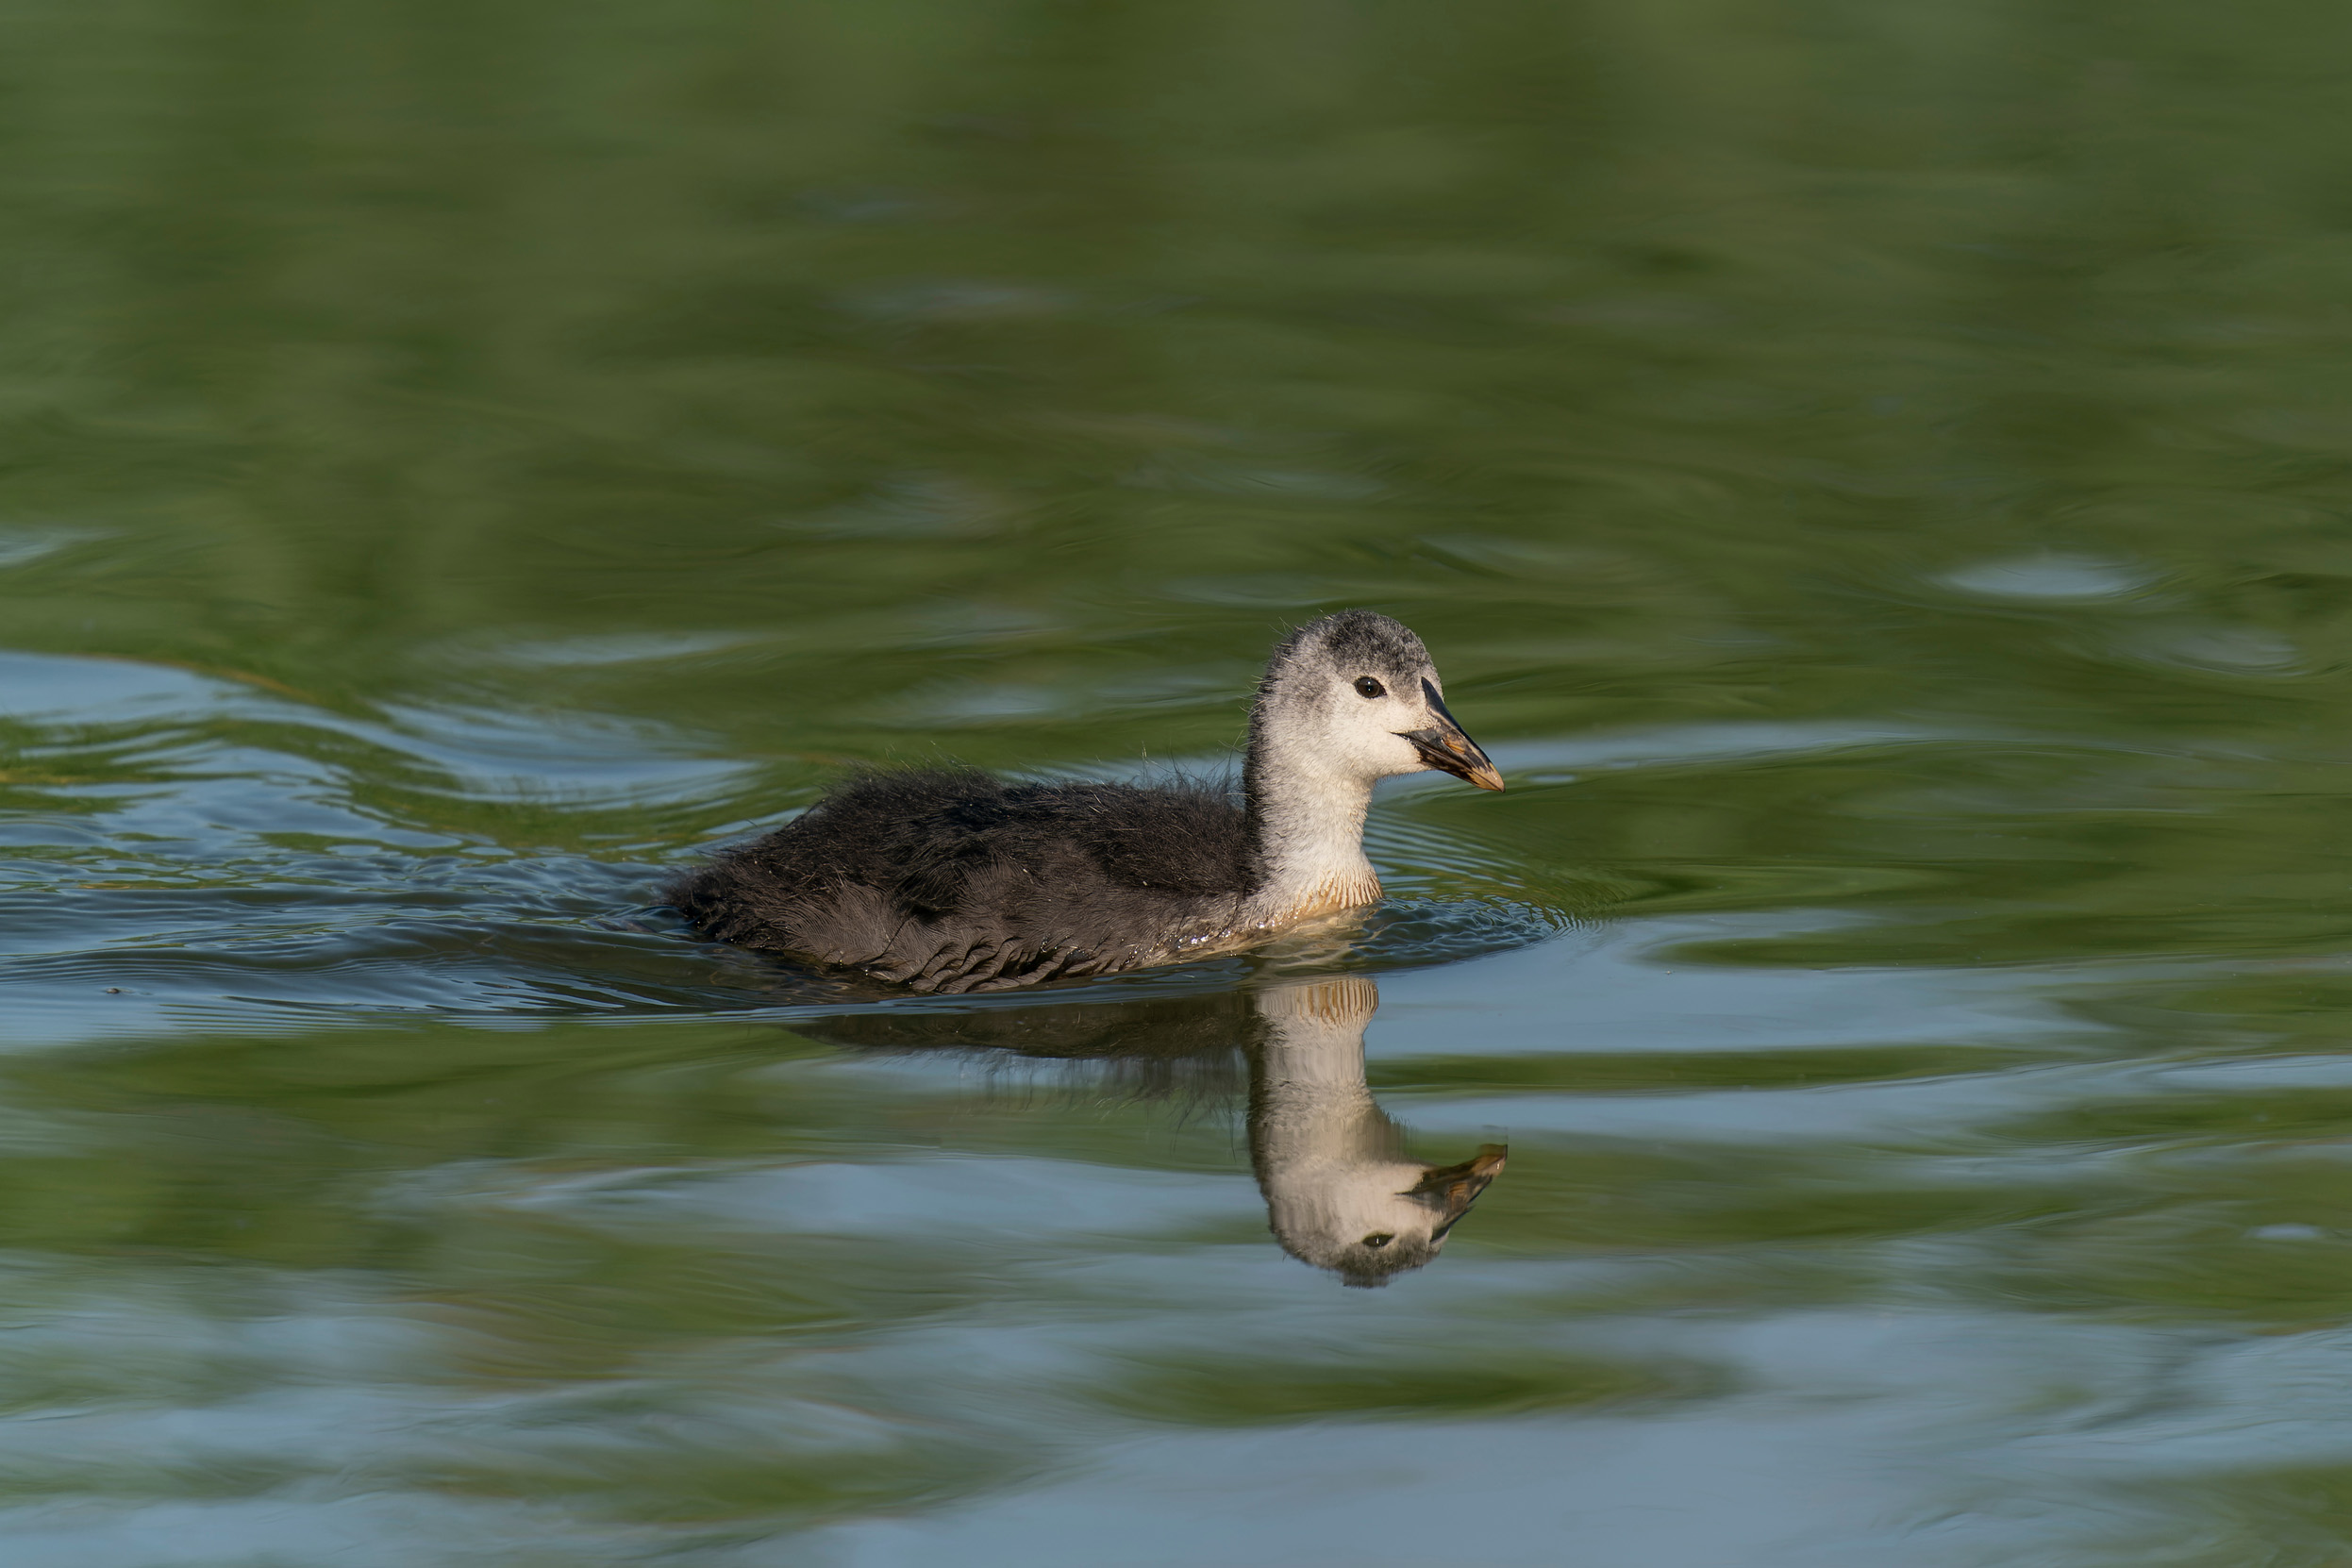 A juvenile Coot swimming on a body of water.